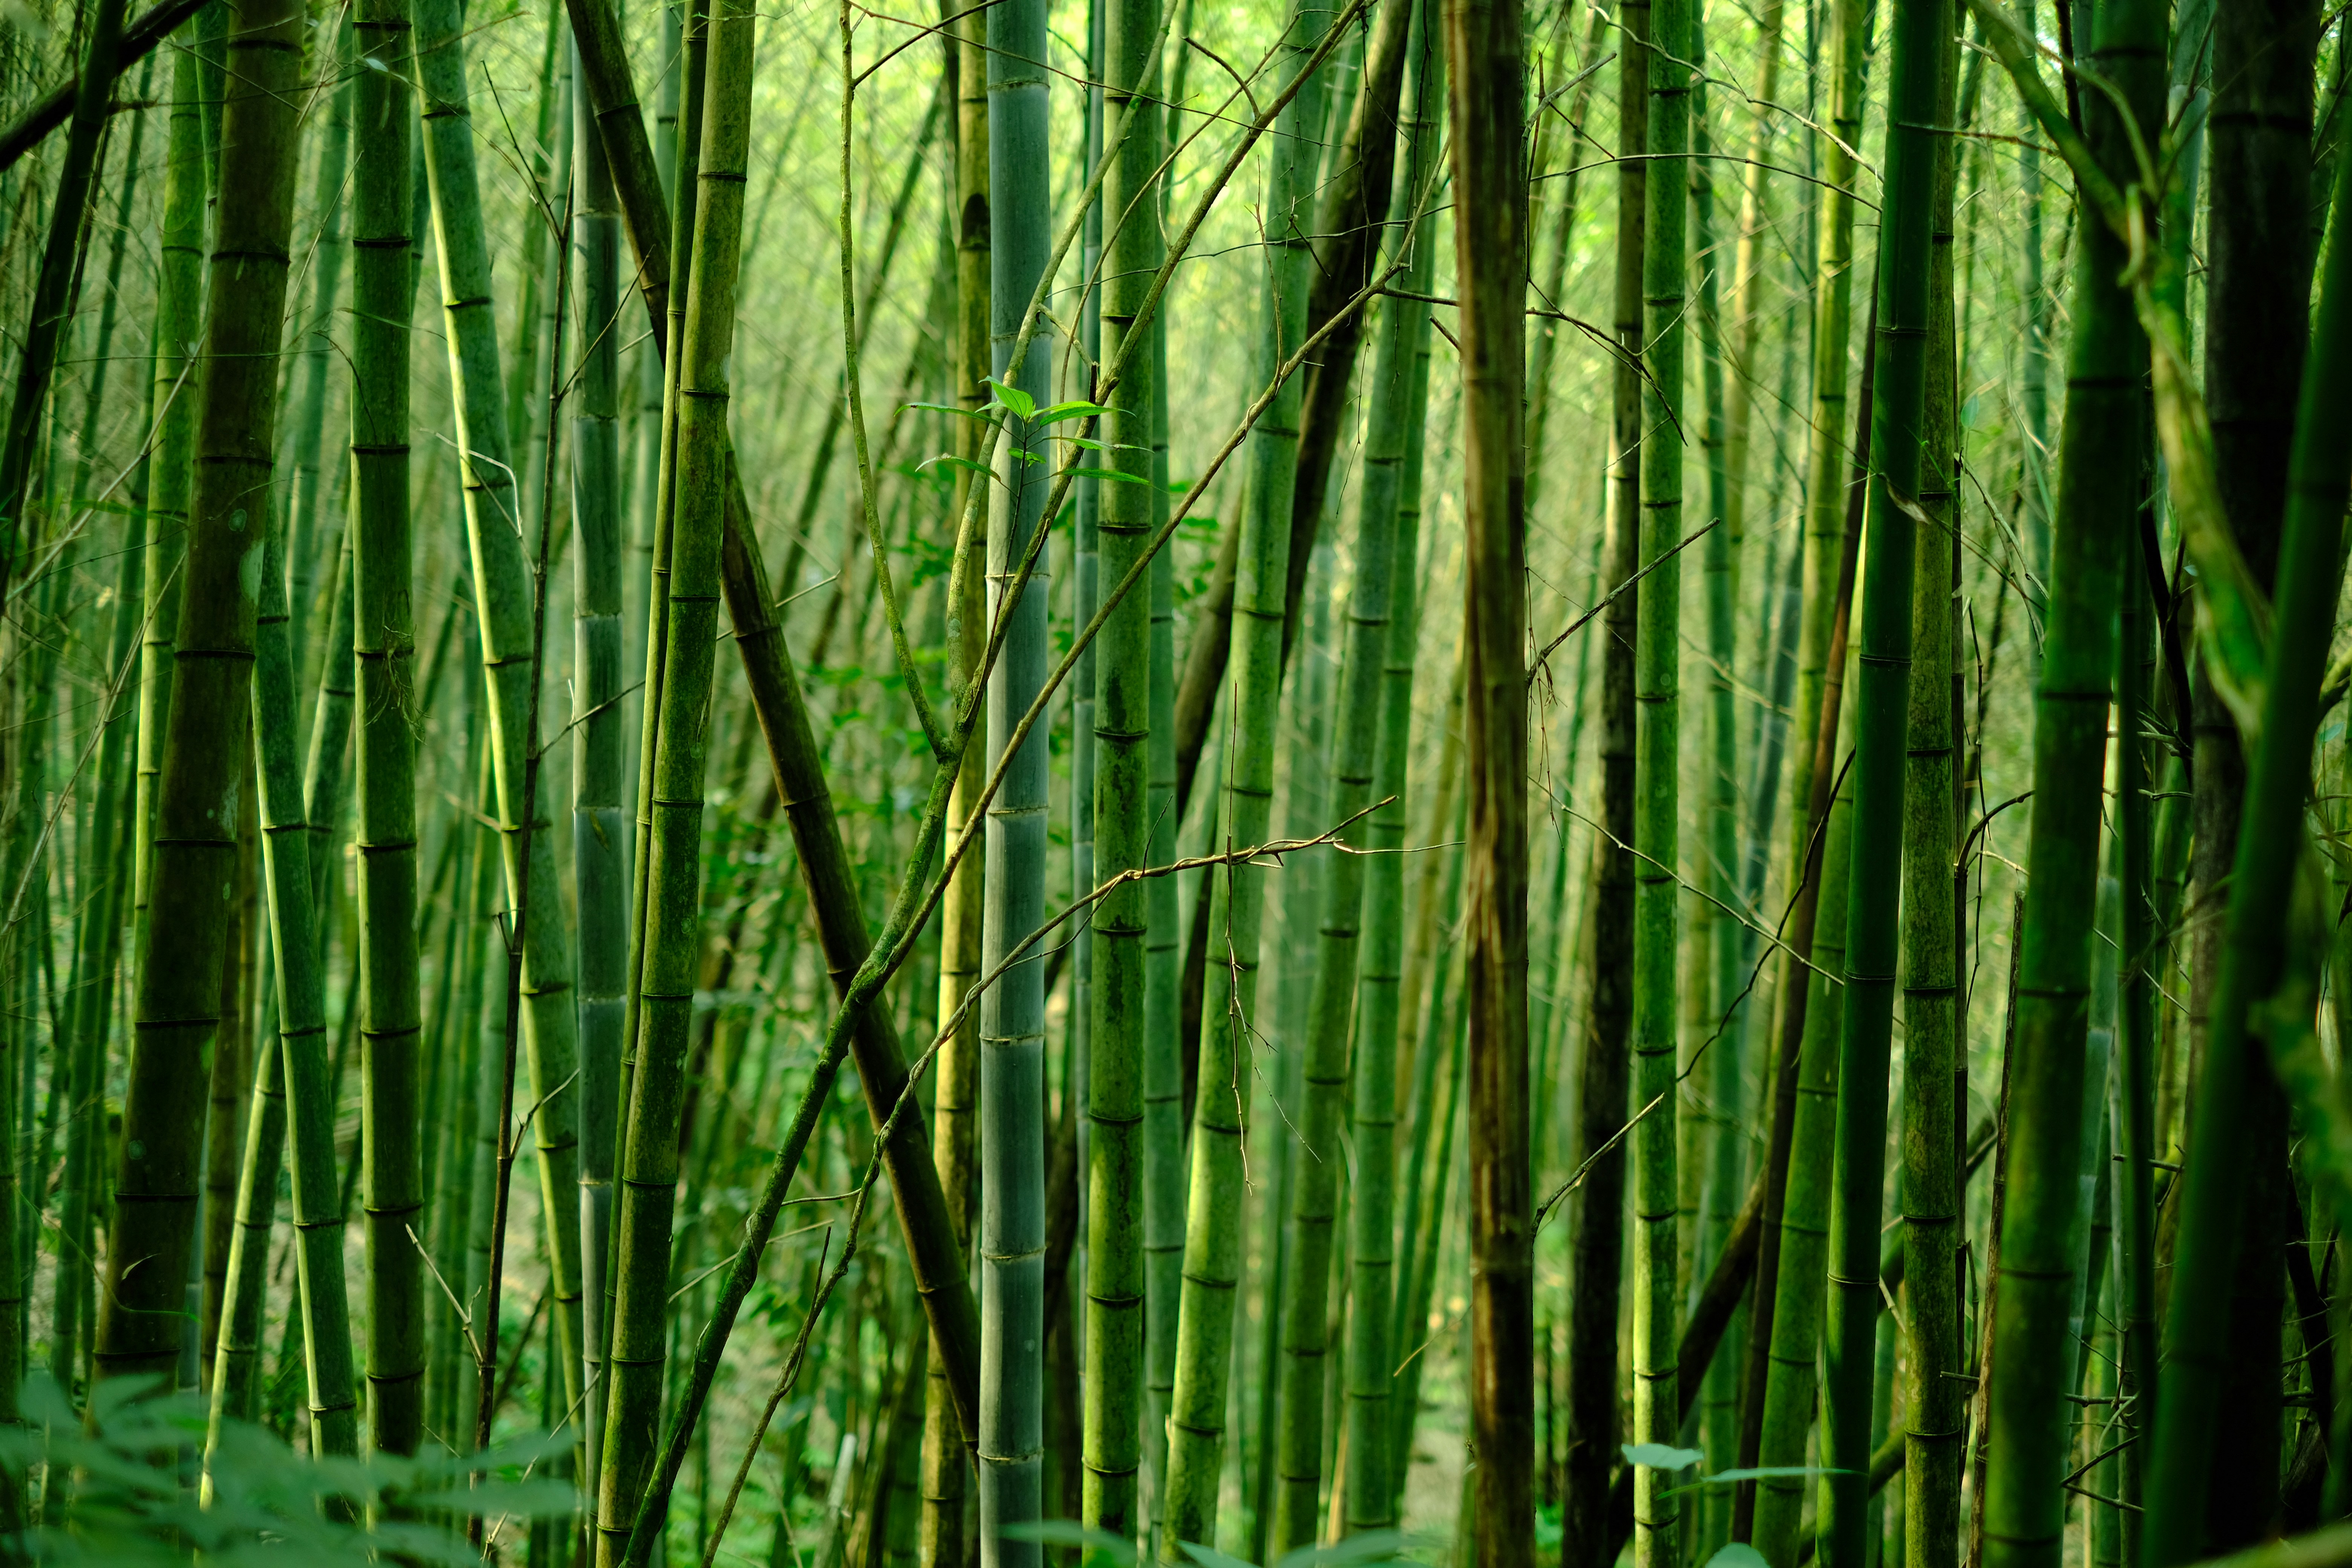 Opening the Bamboo Curtain